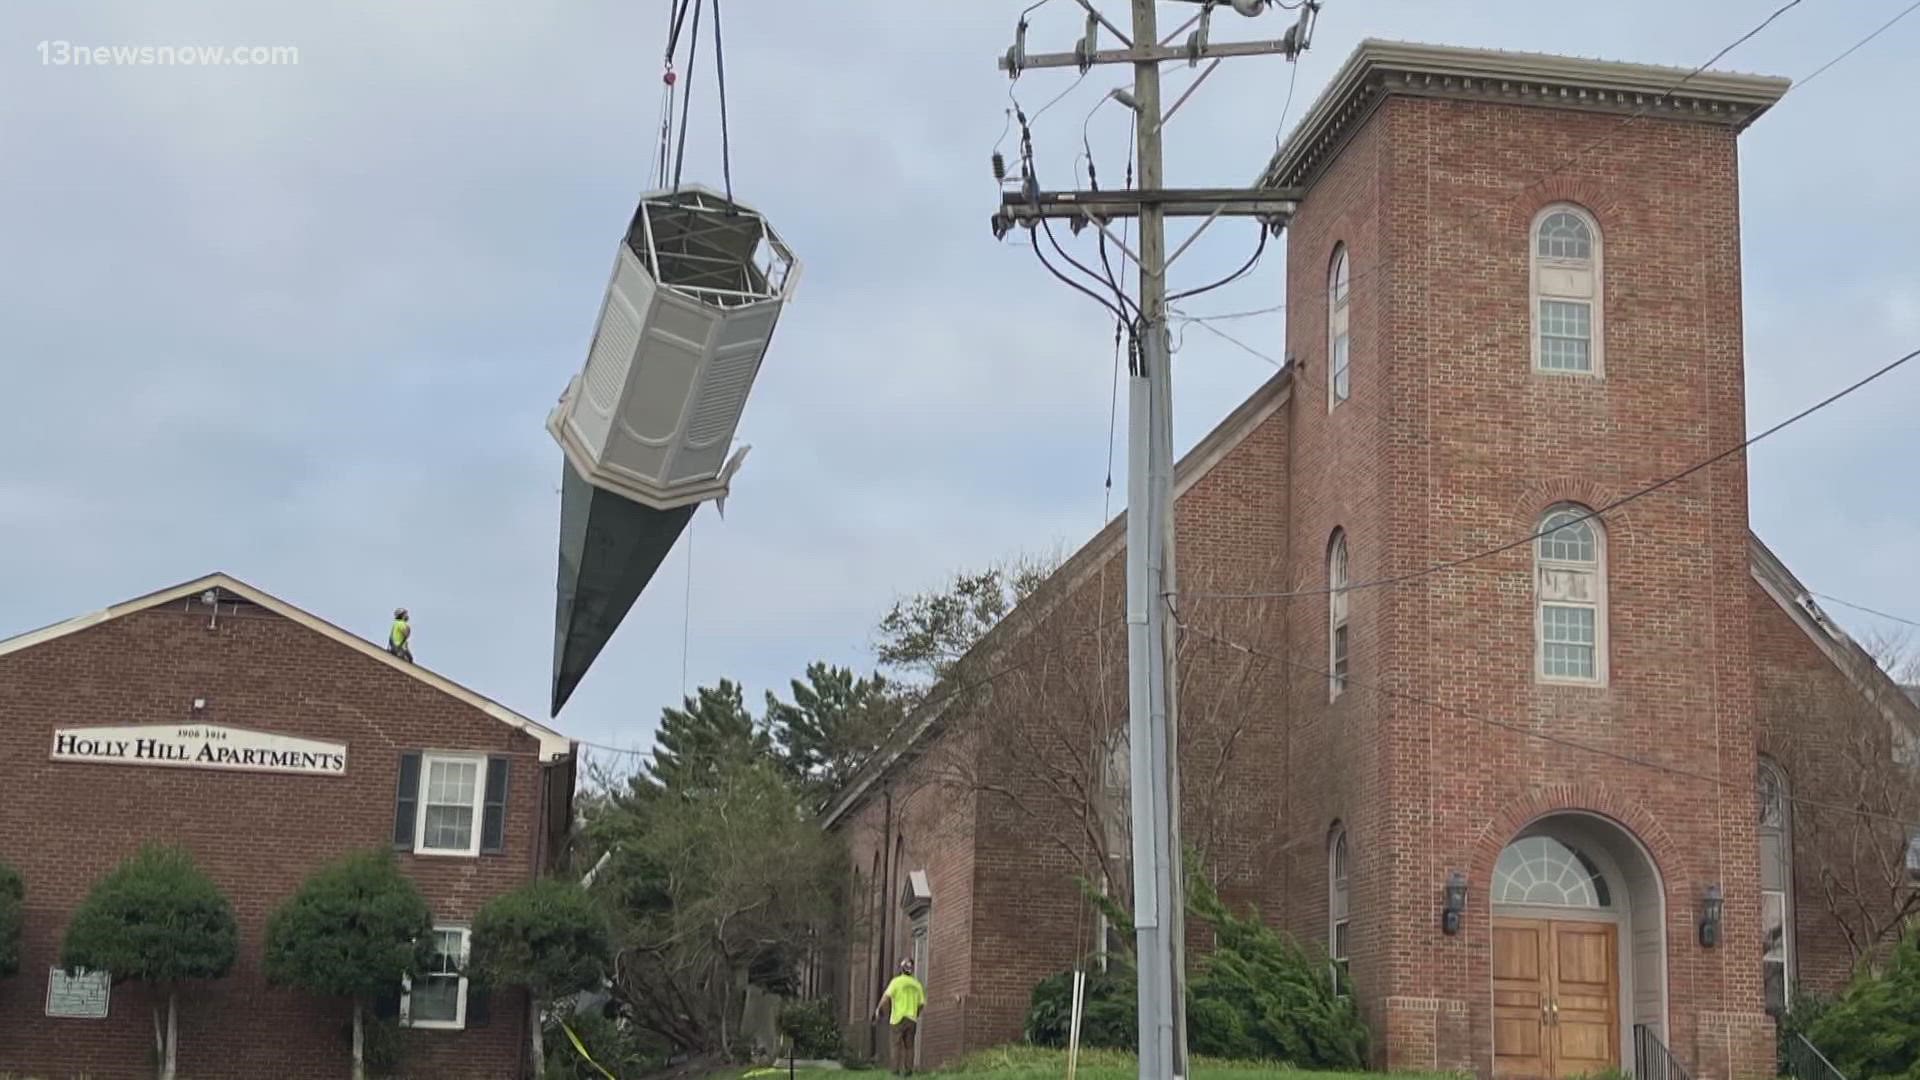 The steeple ripped from the Galilee Church roof in Virginia Beach has a new temporary resting place.